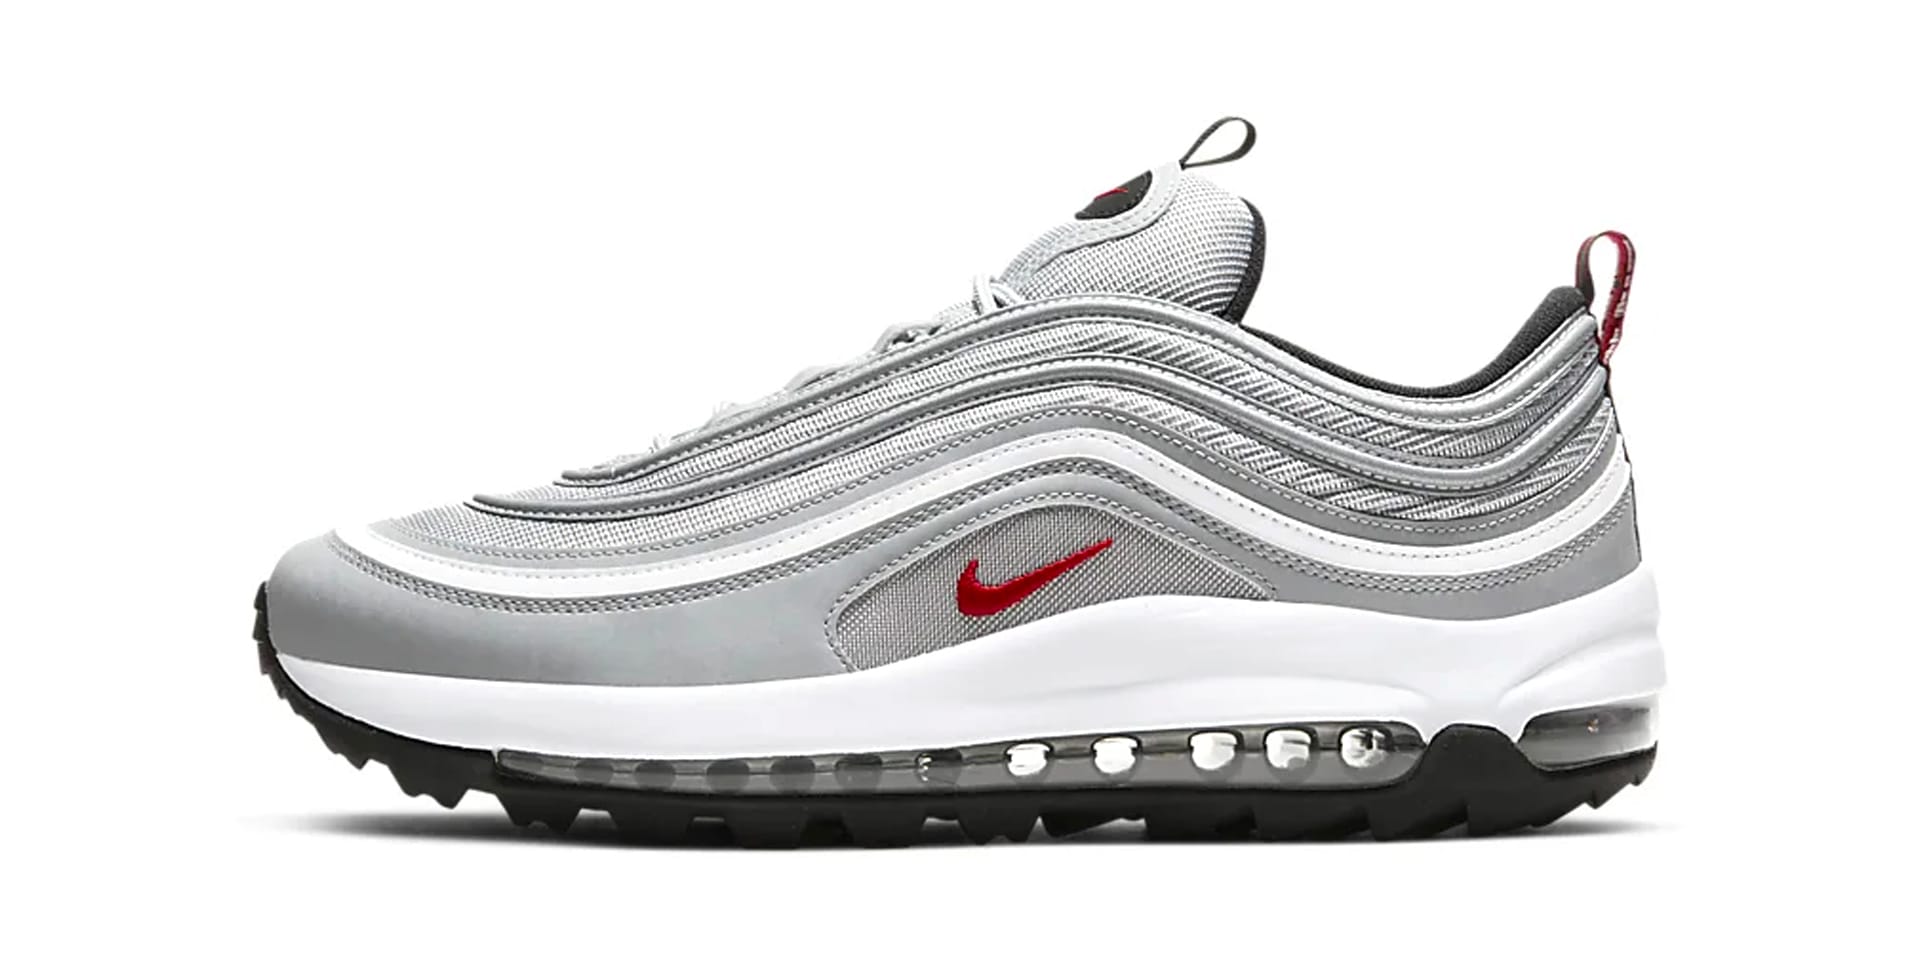 Nike's Latest Air Max 97 Is Sister to 